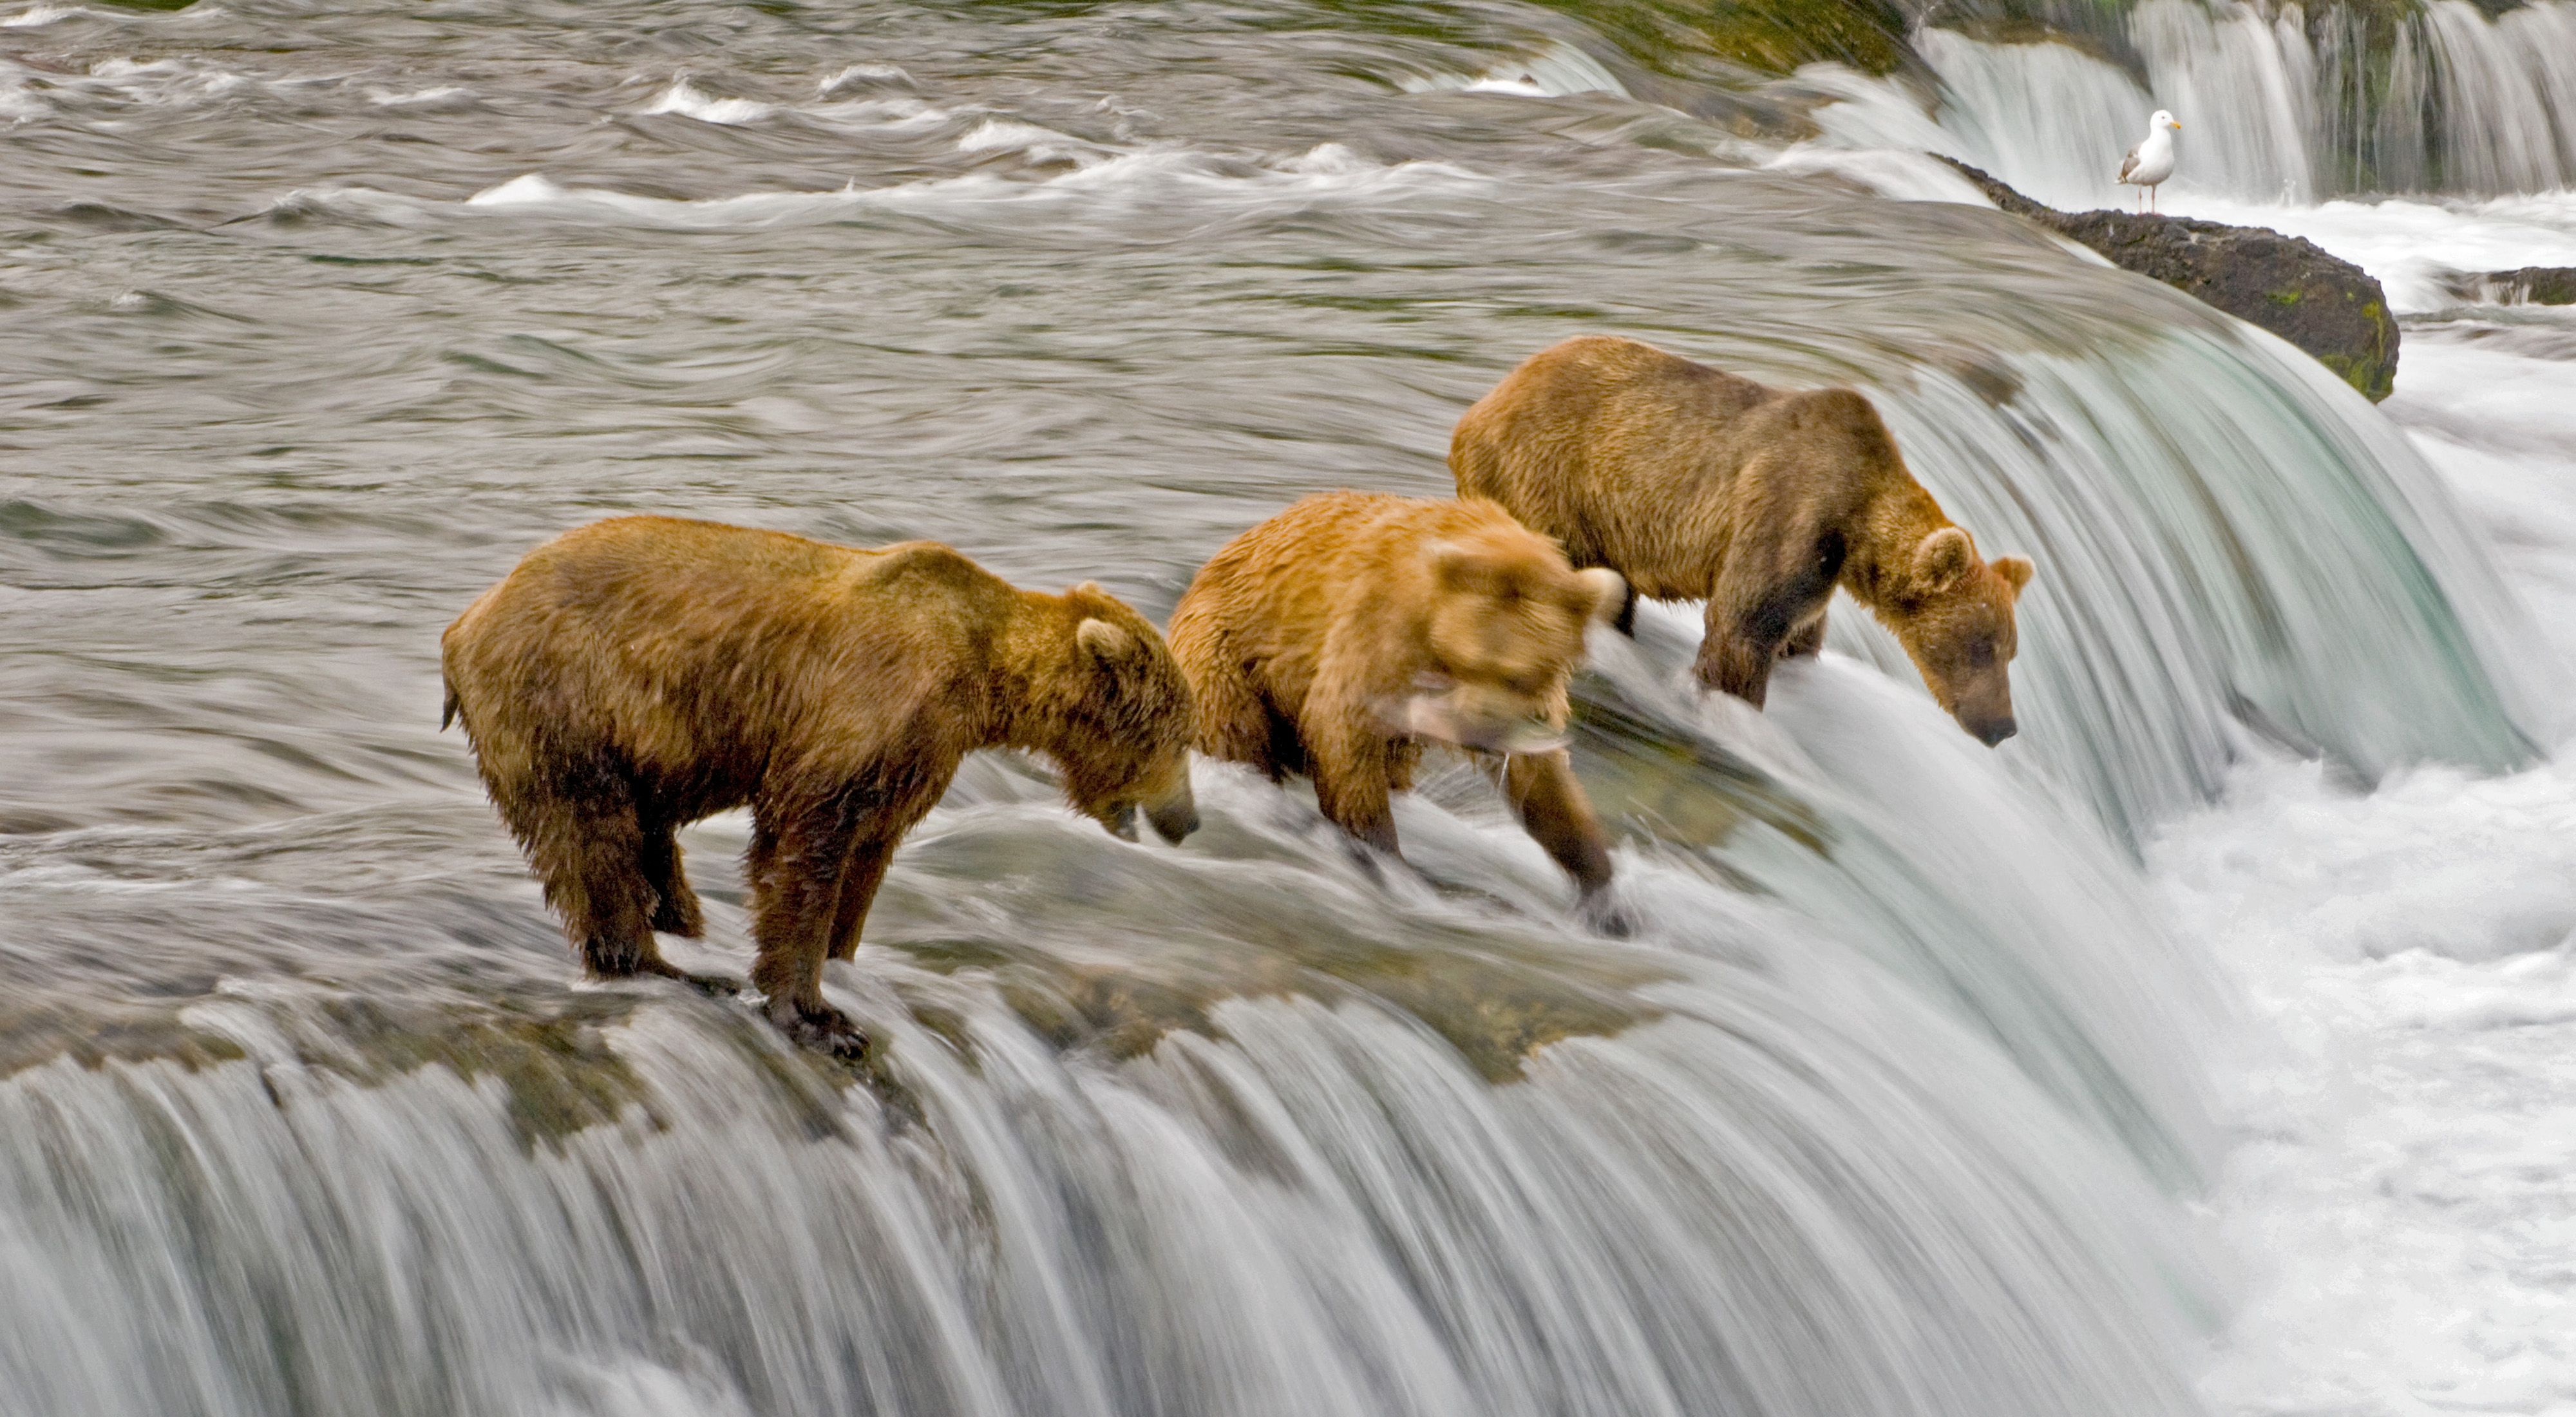 Three brown bears stand at the top of a rushing waterfall in coastal Alaska; the middle bear has a salmon in its mouth.